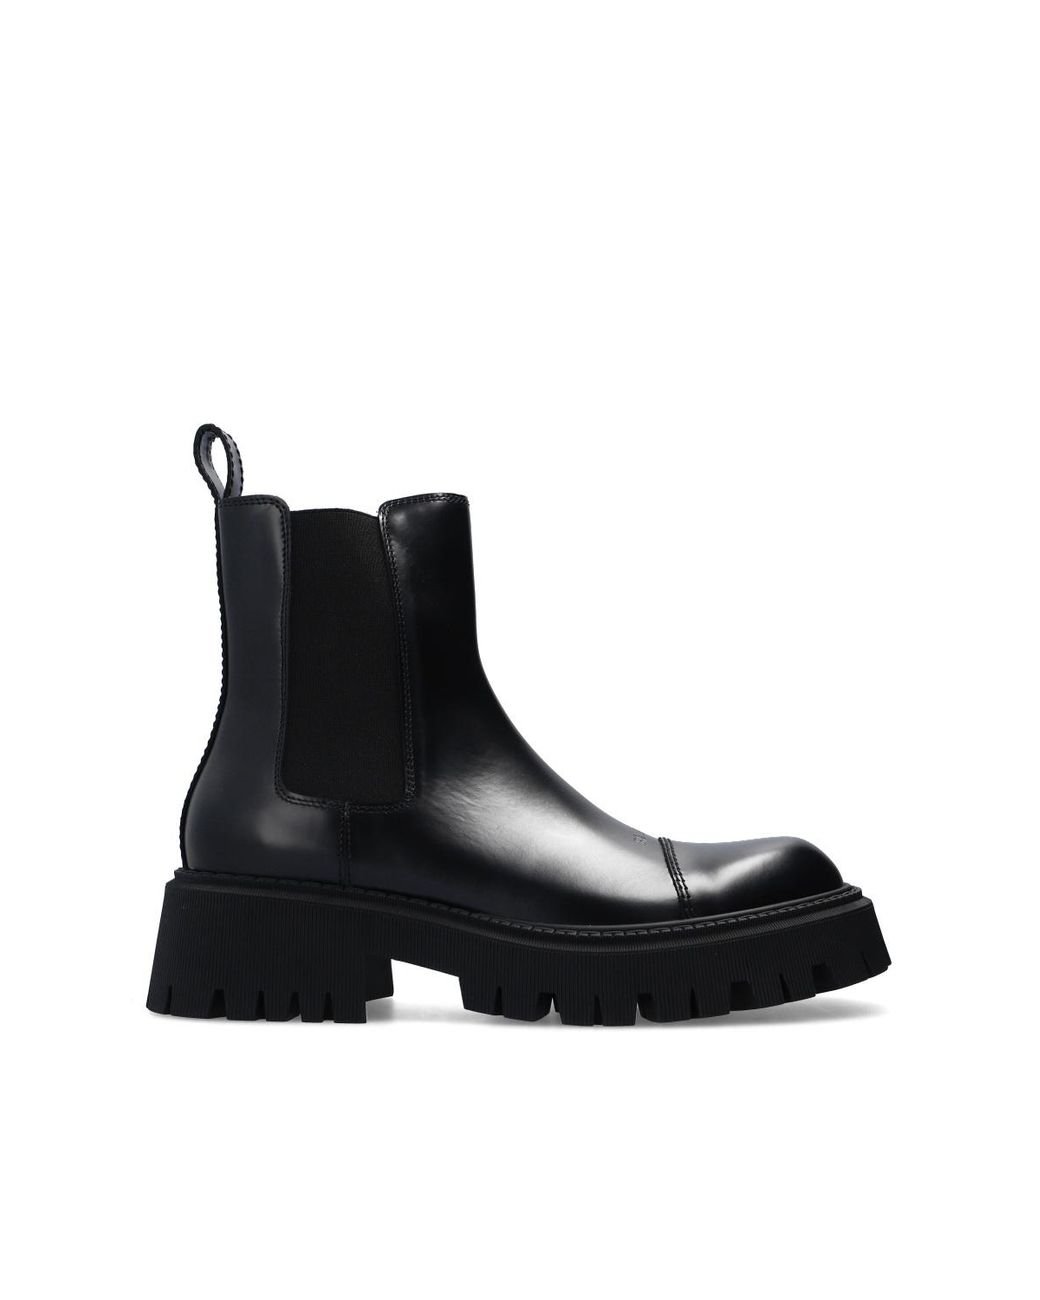 Balenciaga Leather 'tractor' Platform Chelsea Boots Black for Men - Lyst